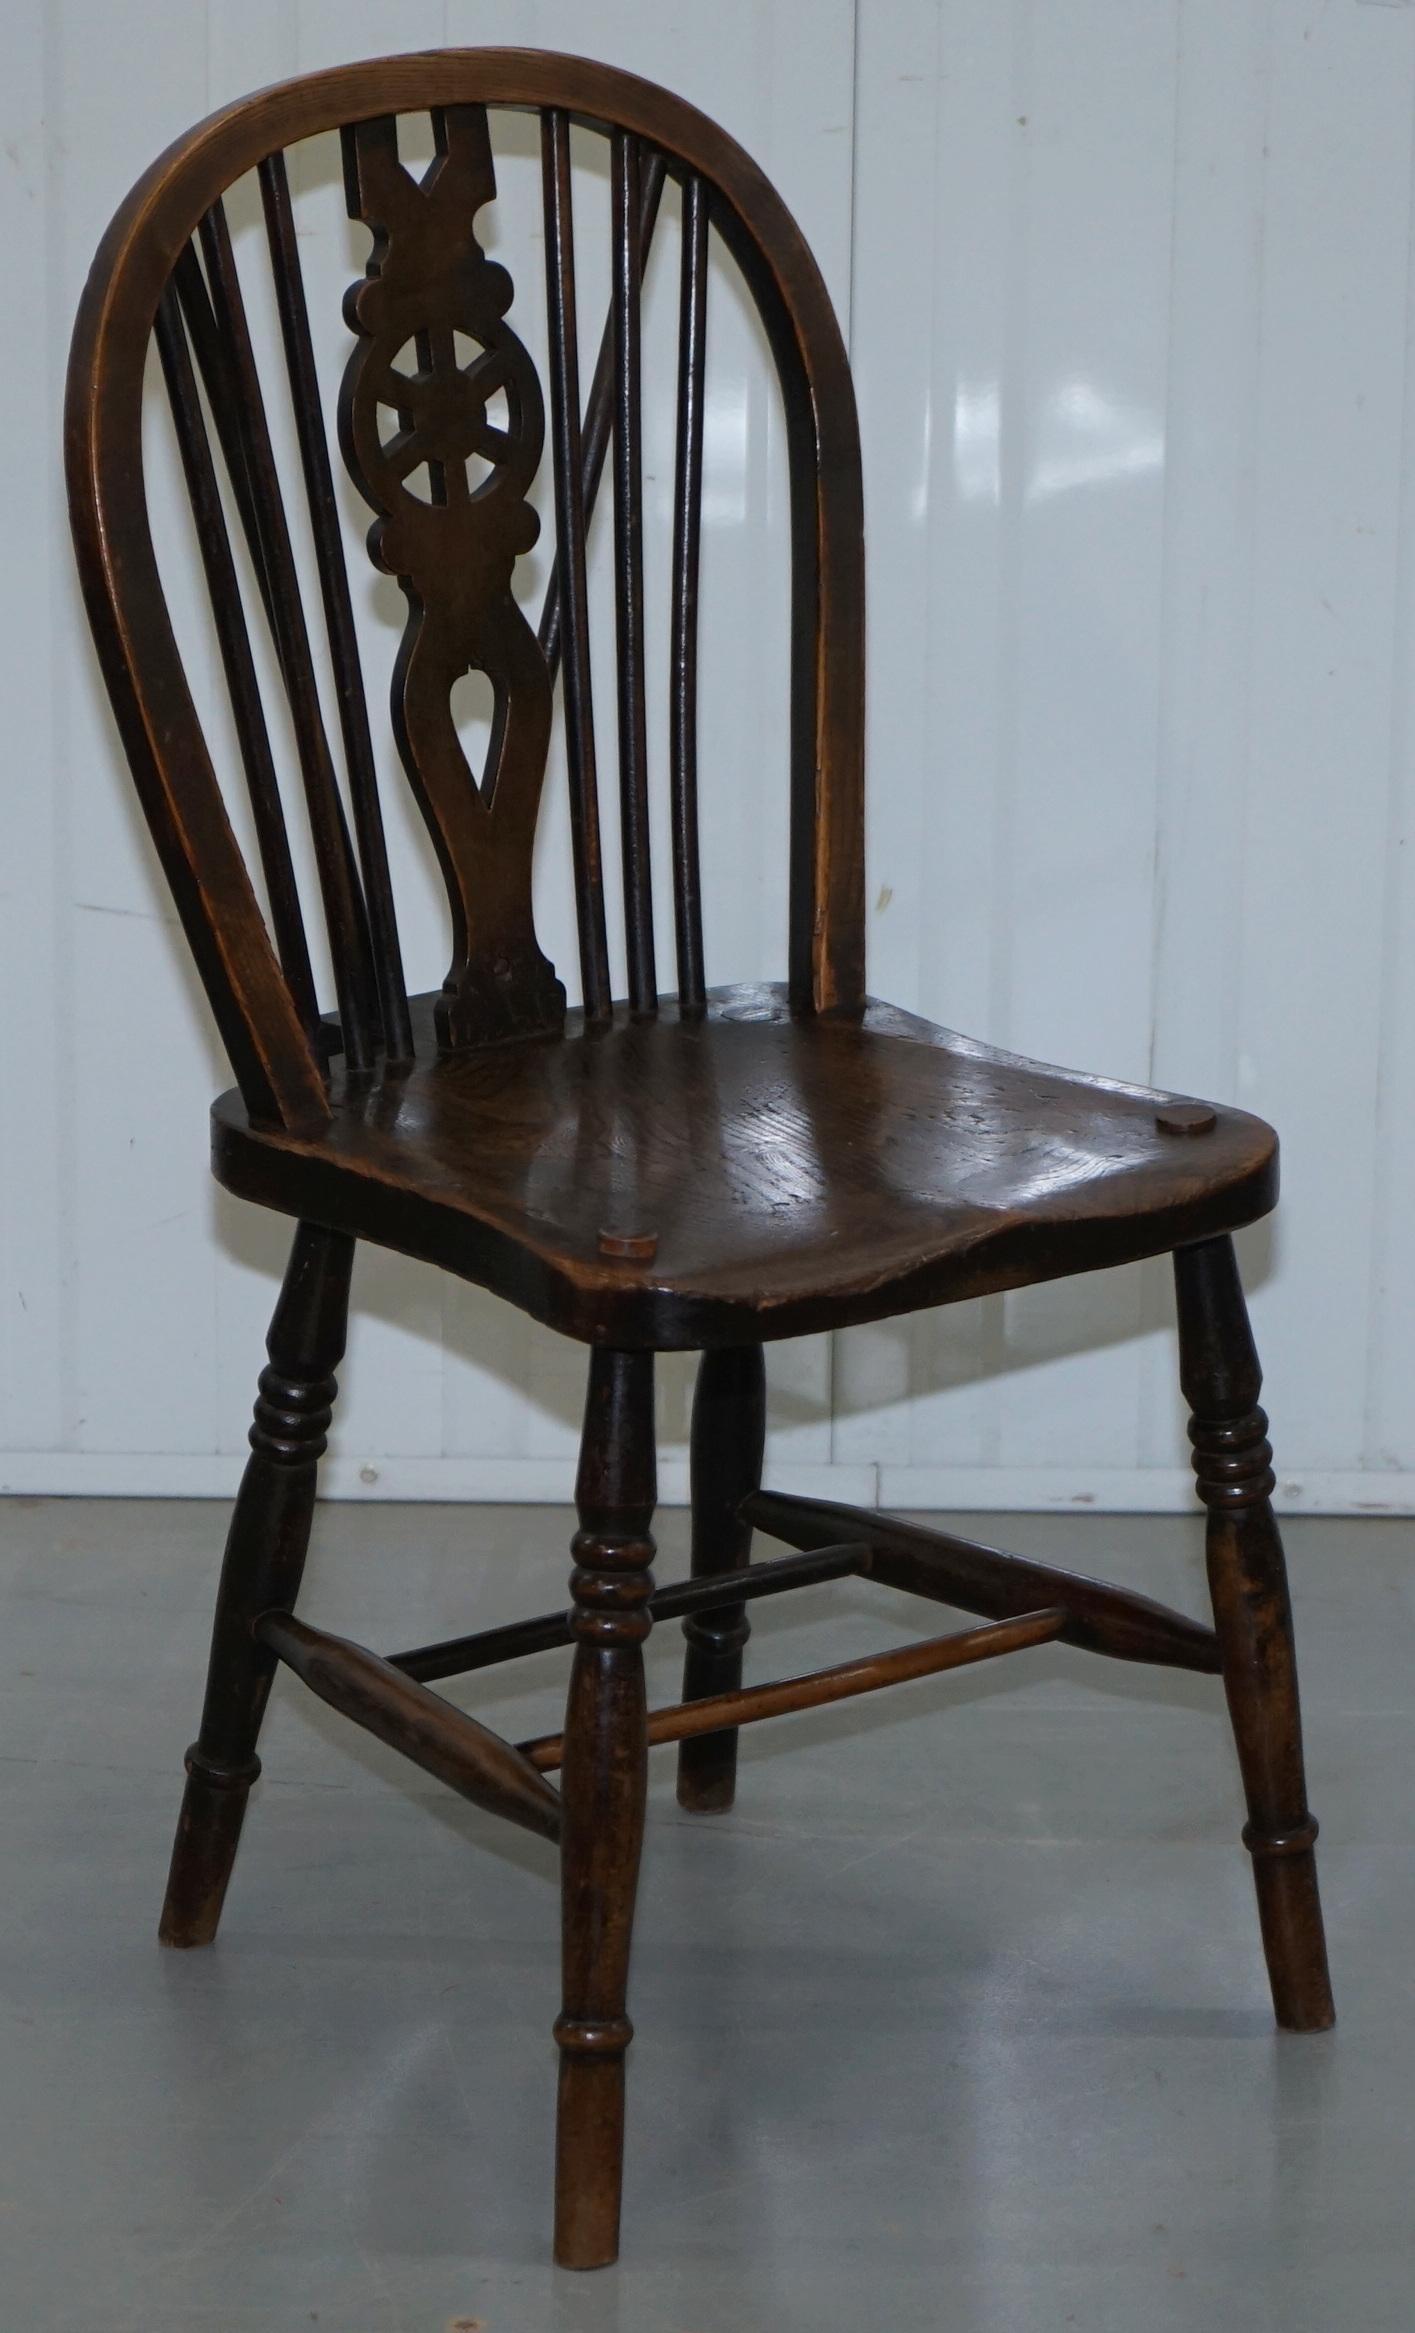 Rare Set of 6 Victorian 1840 Hoop Back Windsor Chairs High Wycombe, England 5